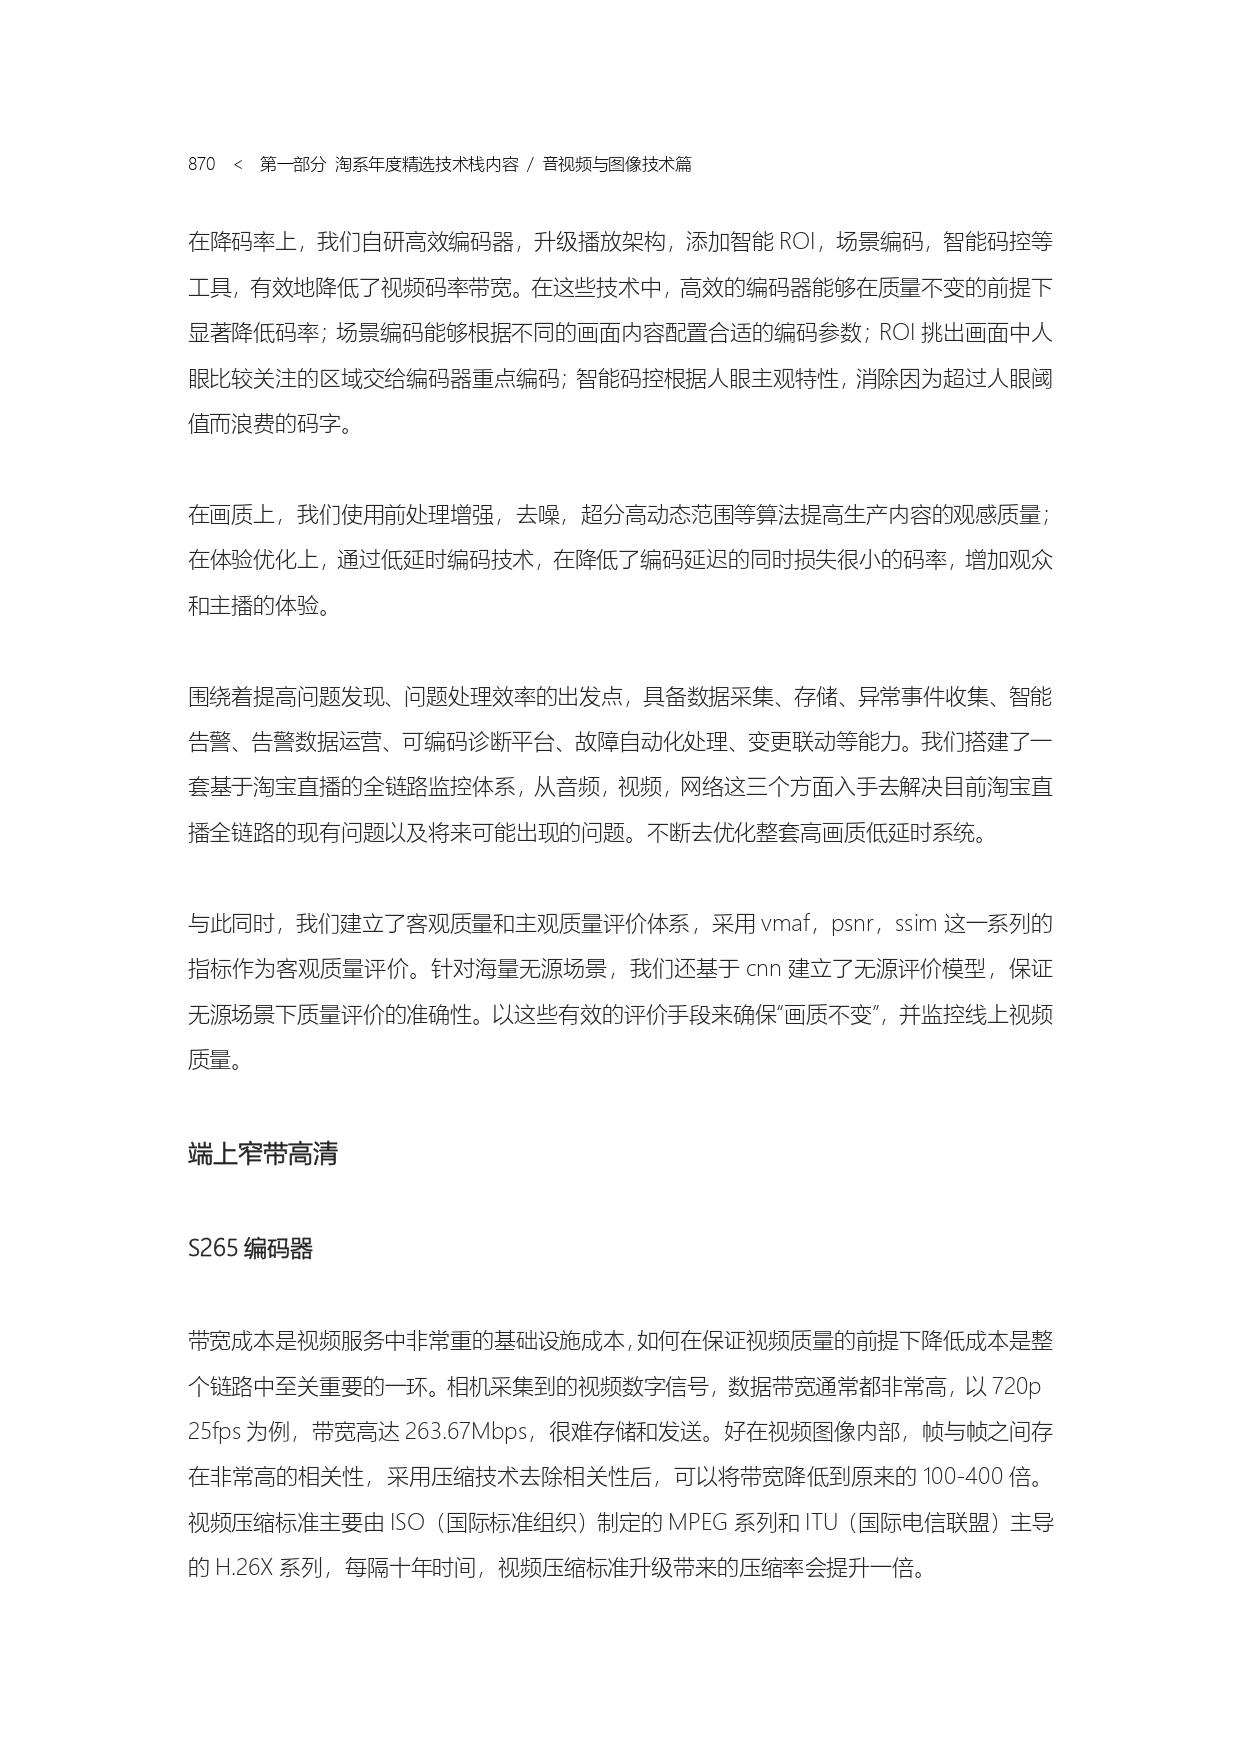 The Complete Works of Tao Technology 2020-571-1189-1-300_page-0300.jpg